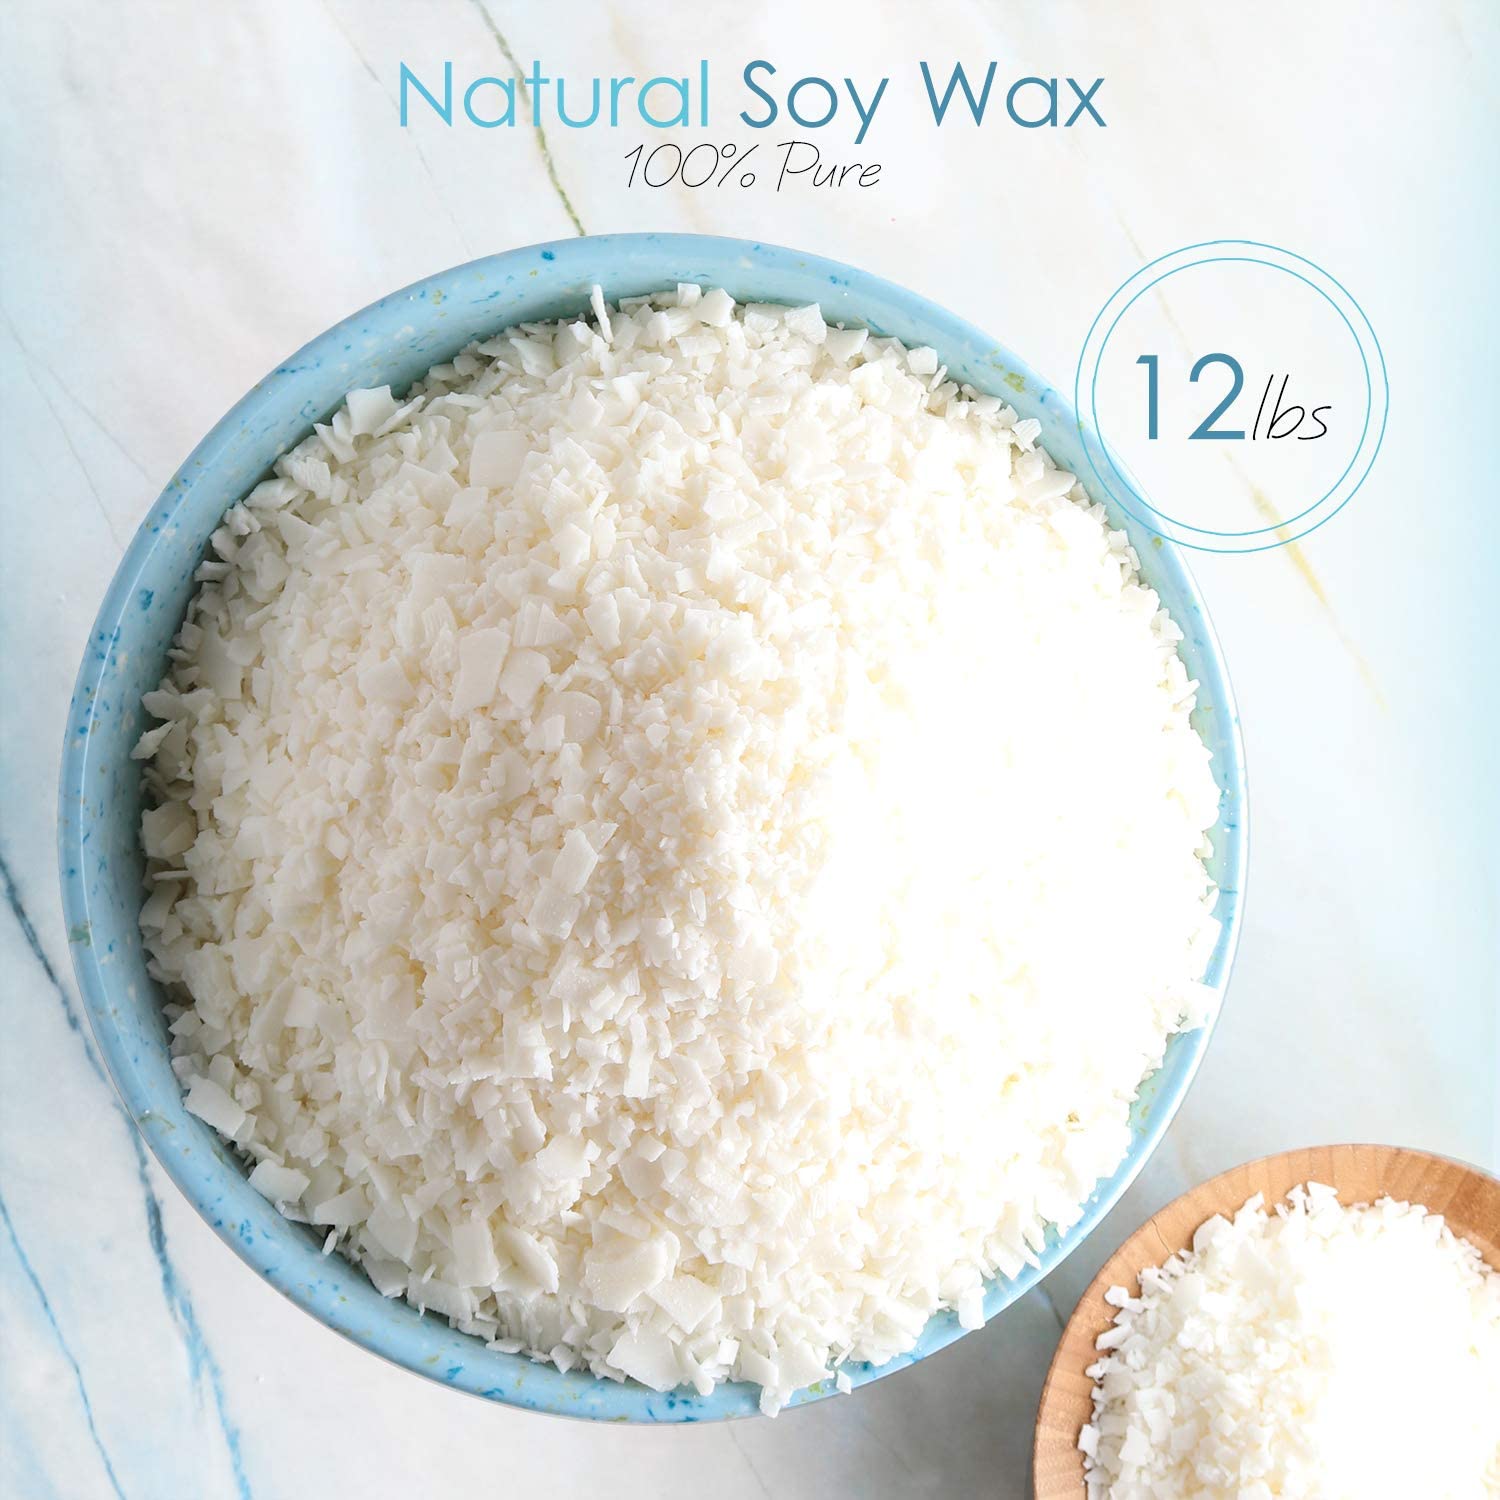 Natural Soy Wax and DIY Candle Making Supplies - 5 Lbs Soy Candle